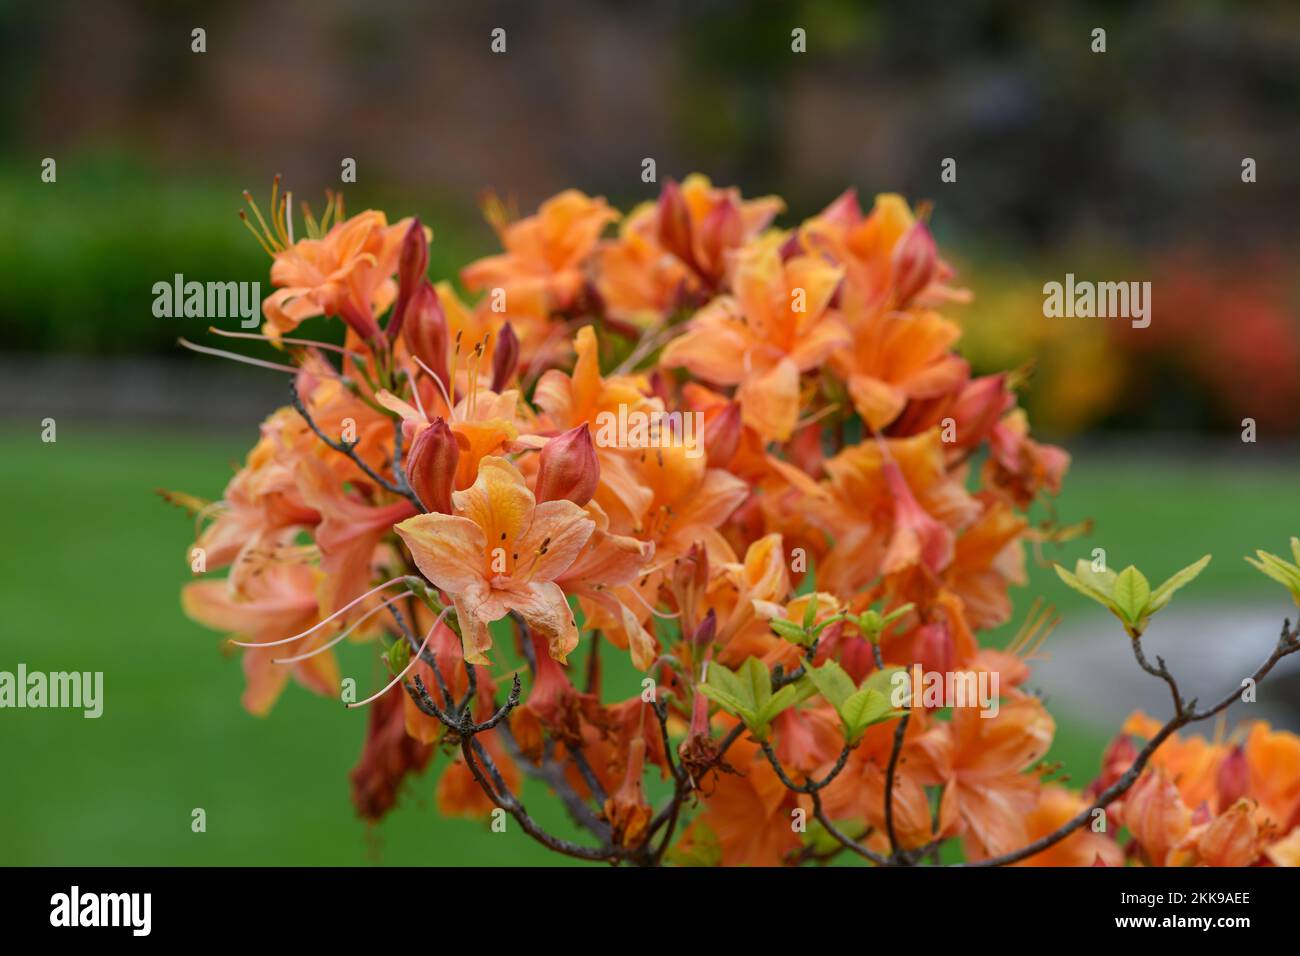 Close up of orange early azalea (rhododendron prinophyllum) flowers in bloom Stock Photo